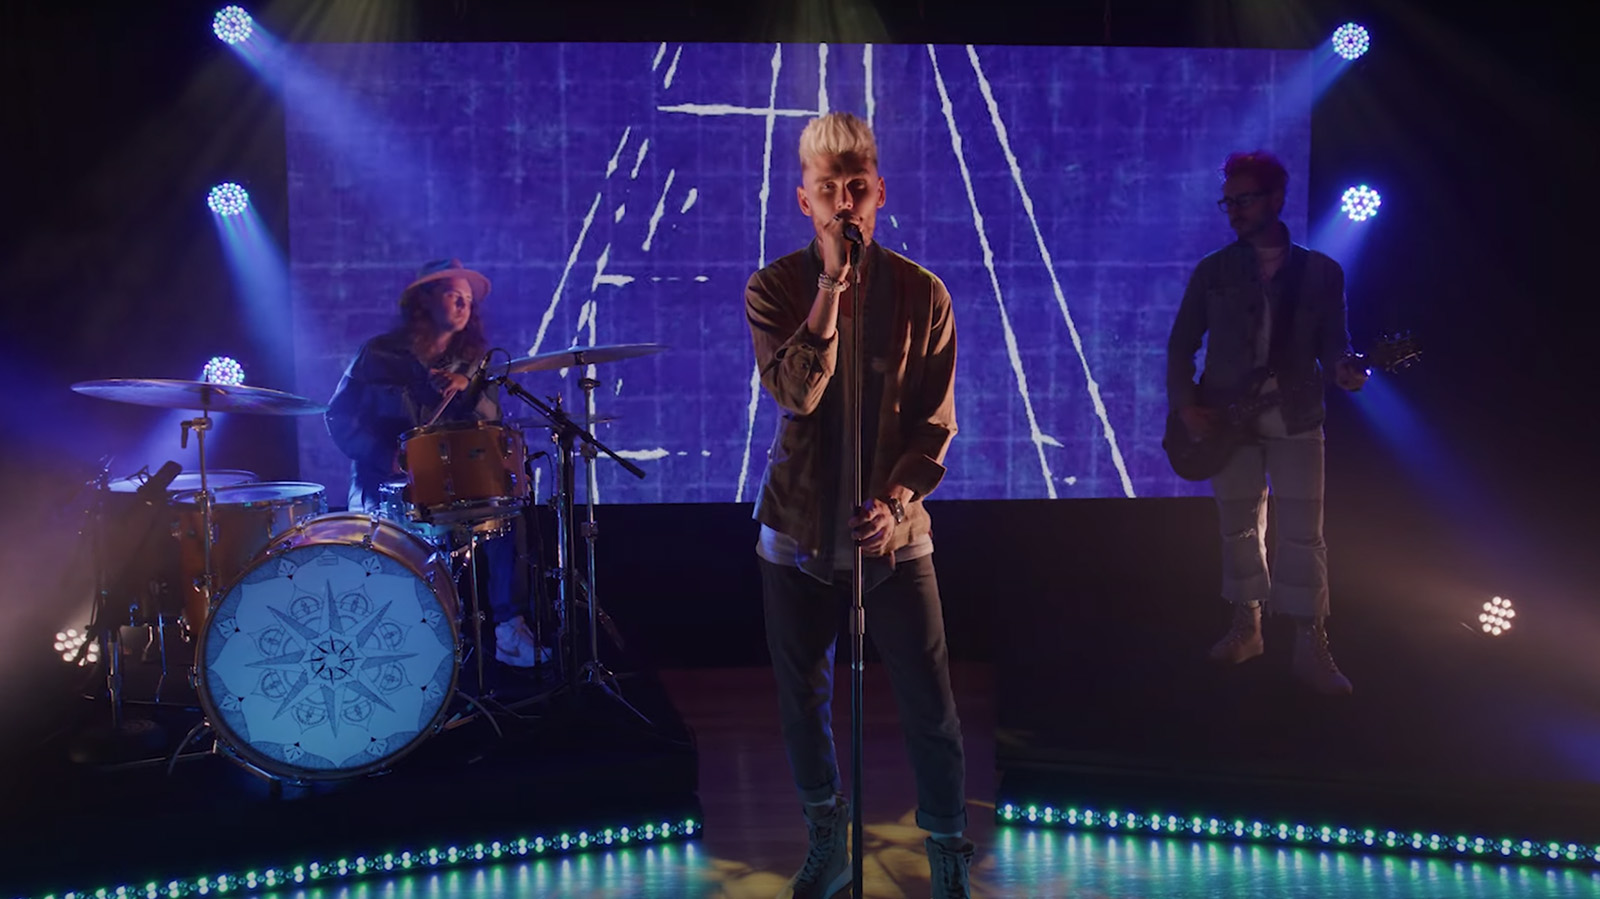 Colton Dixon performs in the "Build A Boat" music video. Video screen grab